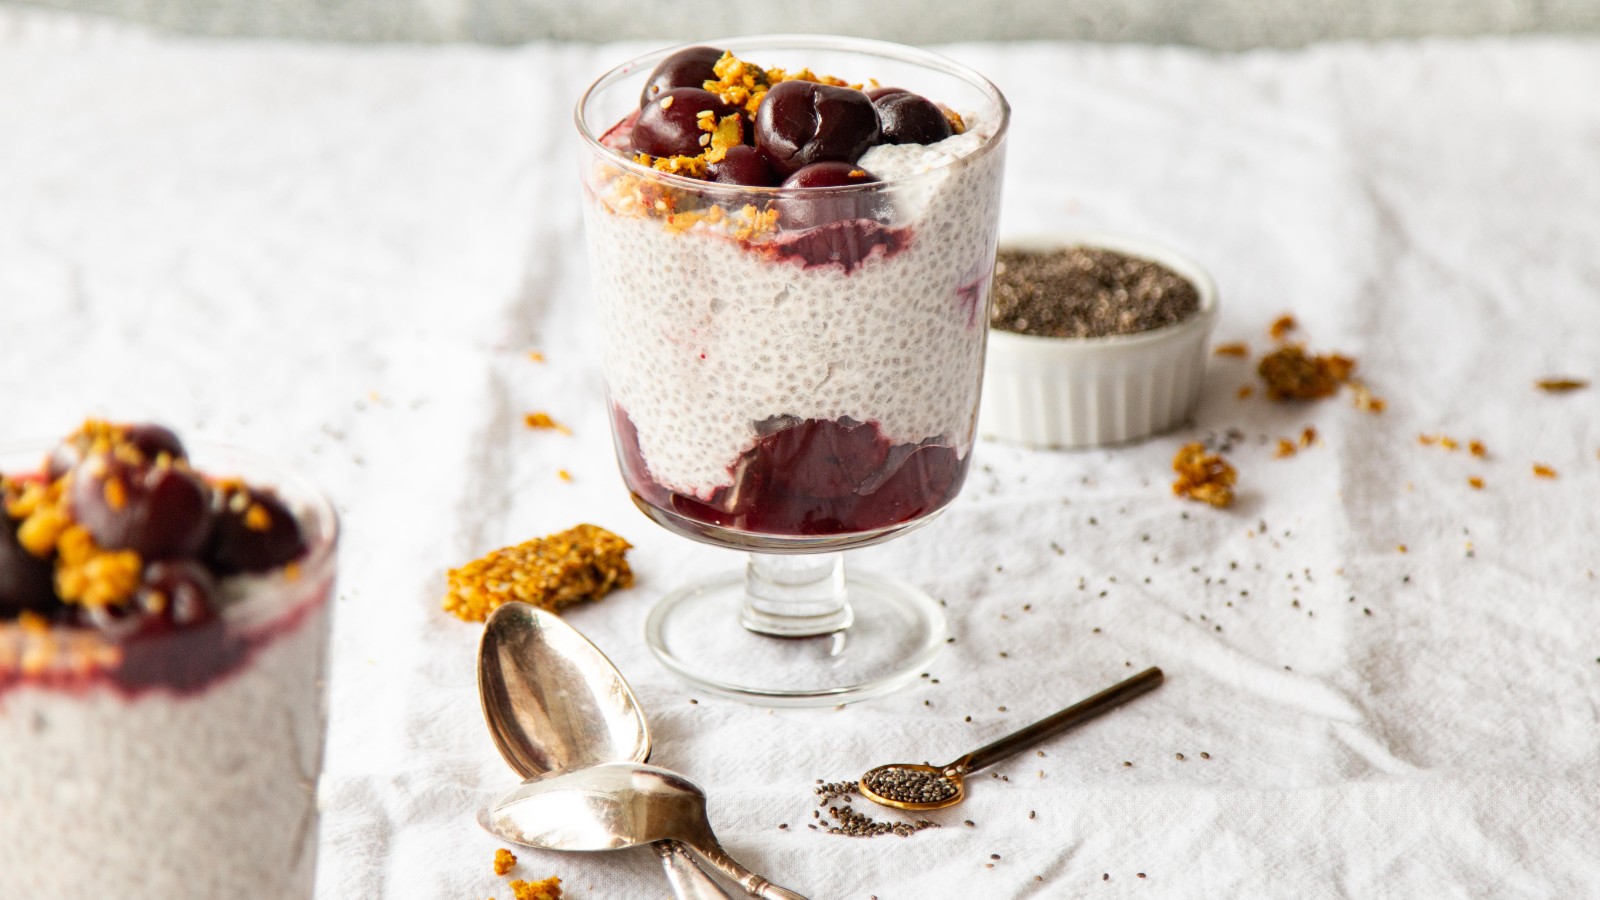 Image of Vegan Coconut Chia Pudding with Cherries